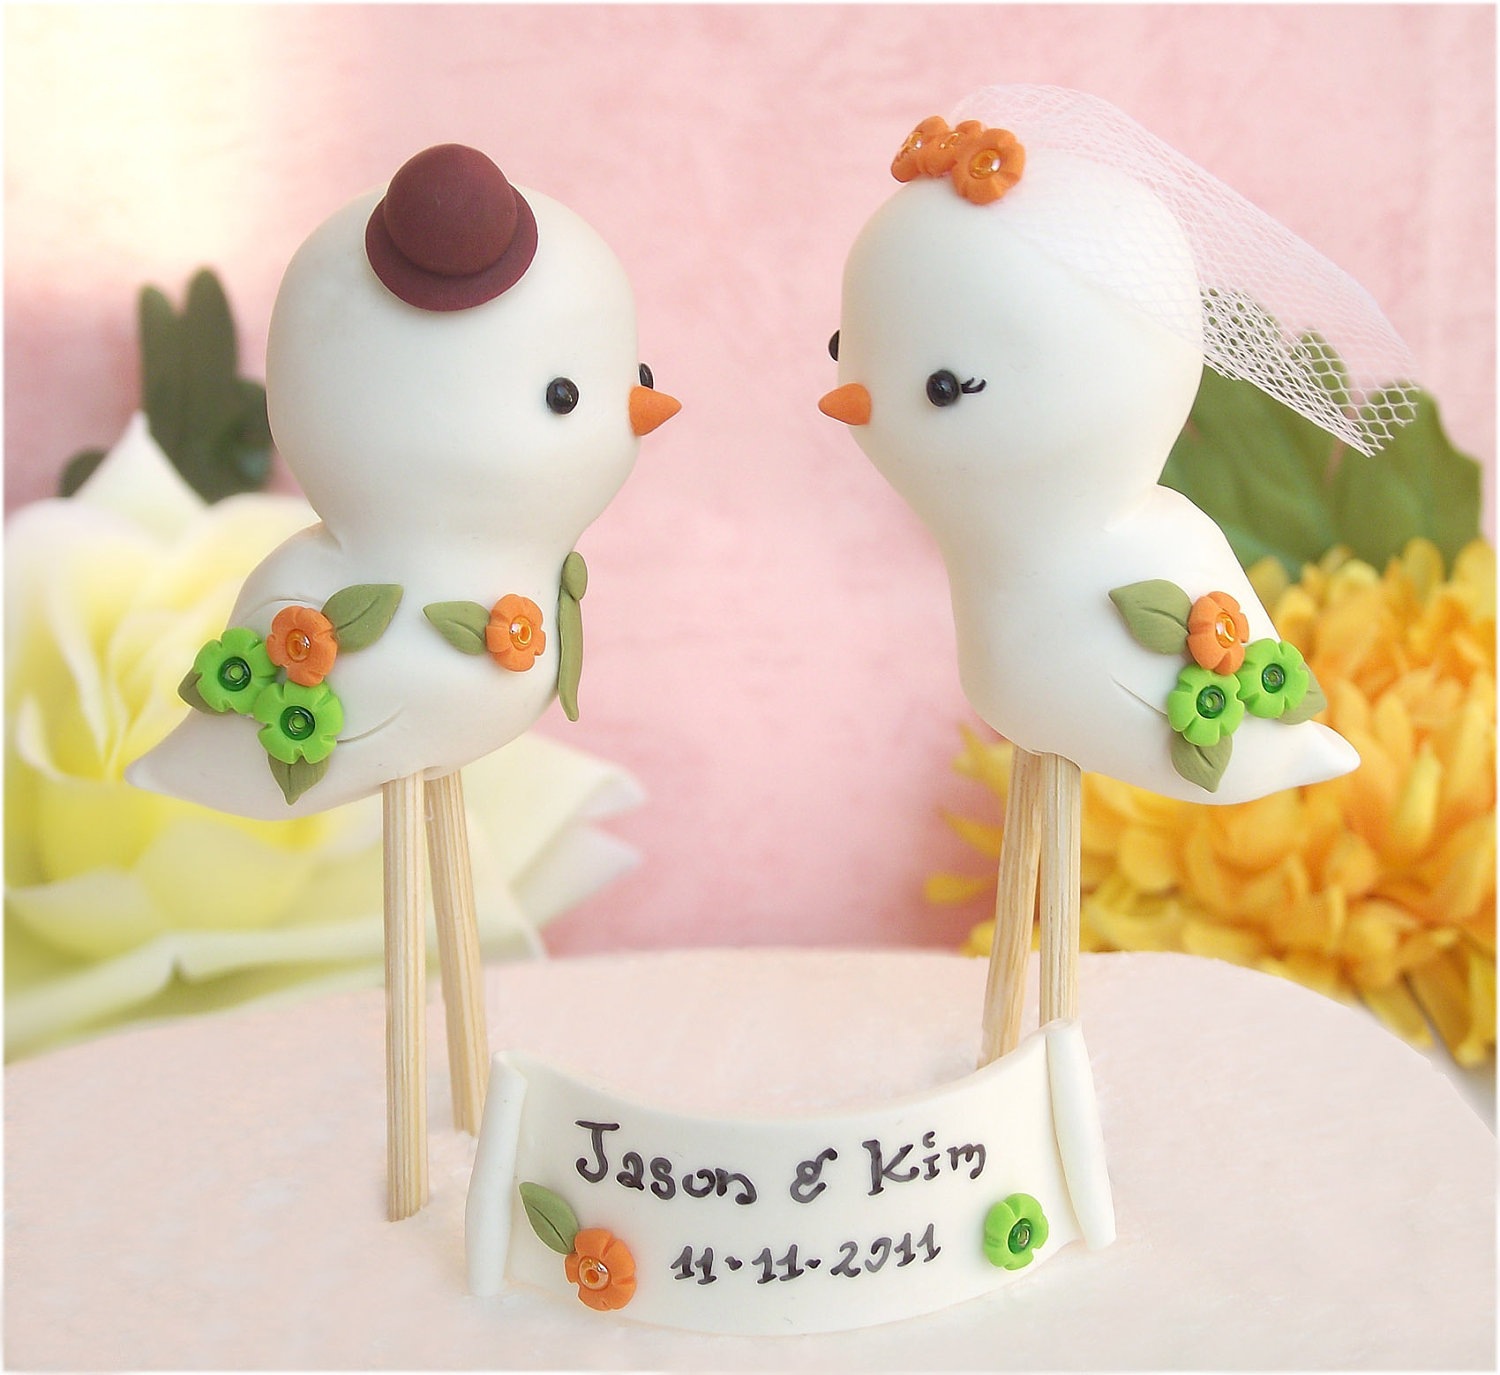 Personal Wedding Cake Toppers